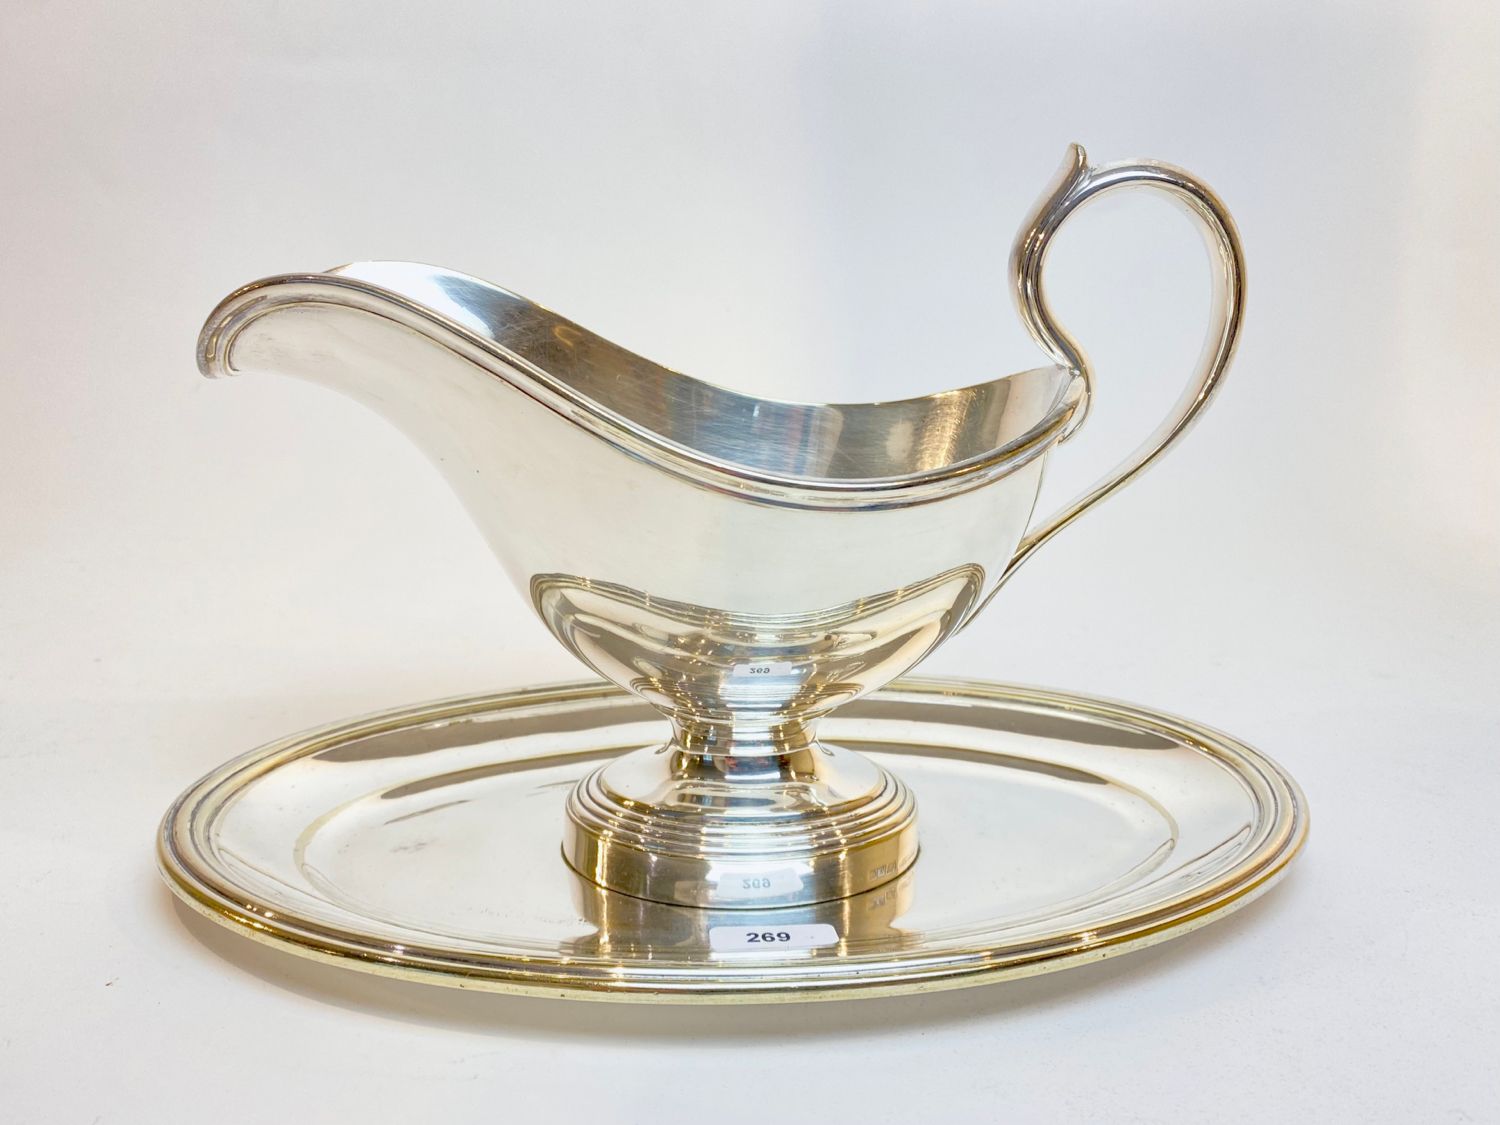 CHRISTOFLE - Paris Sauce boat on its frame, 20th century, silver plated metal, h&hellip;